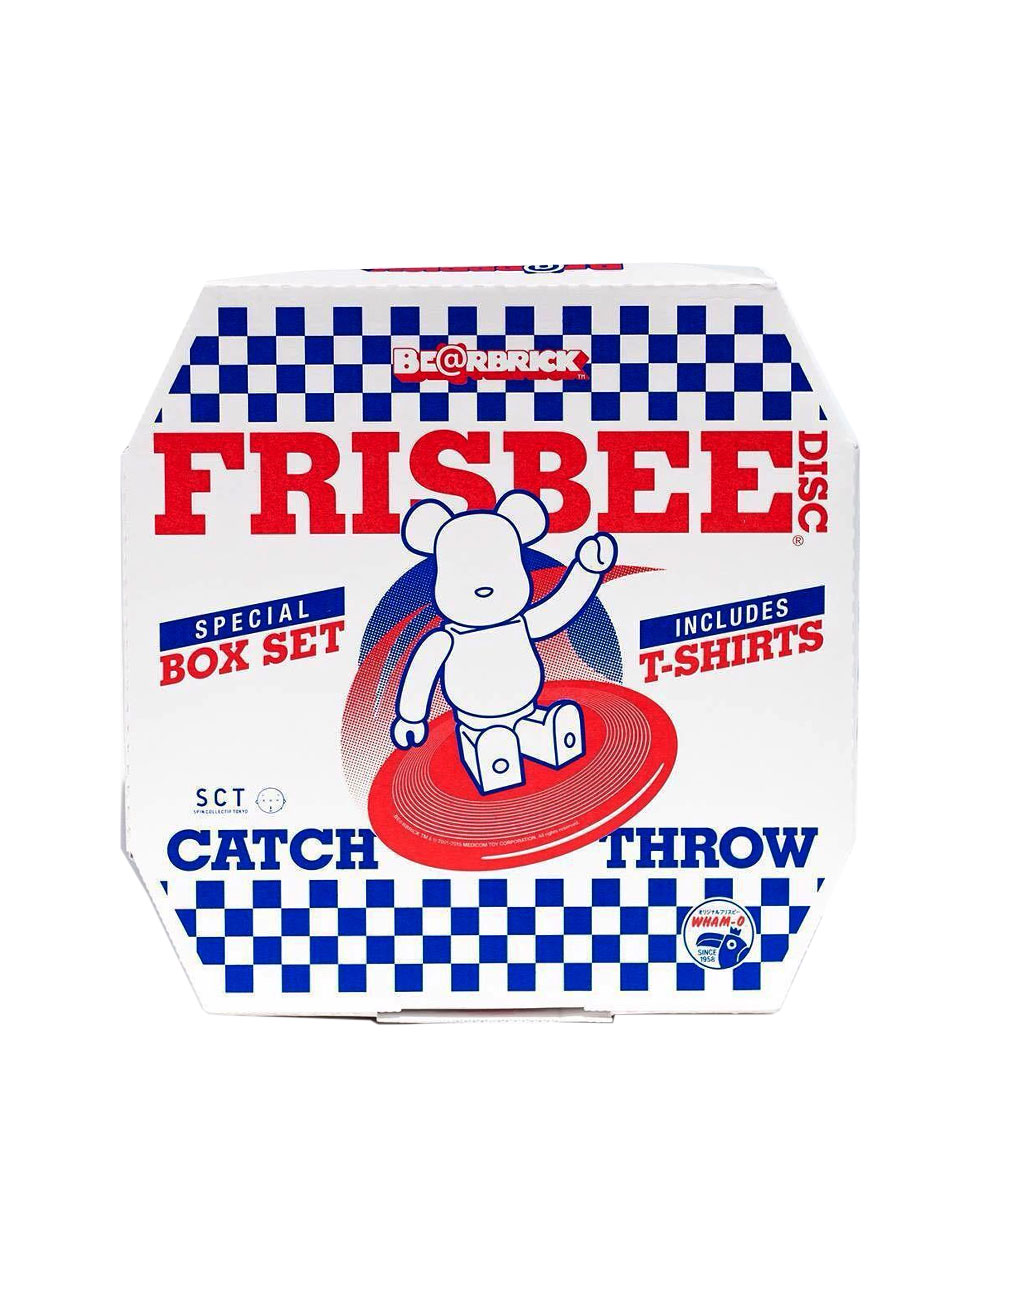 Be@rtee Frisbee Box Set Limited Edition